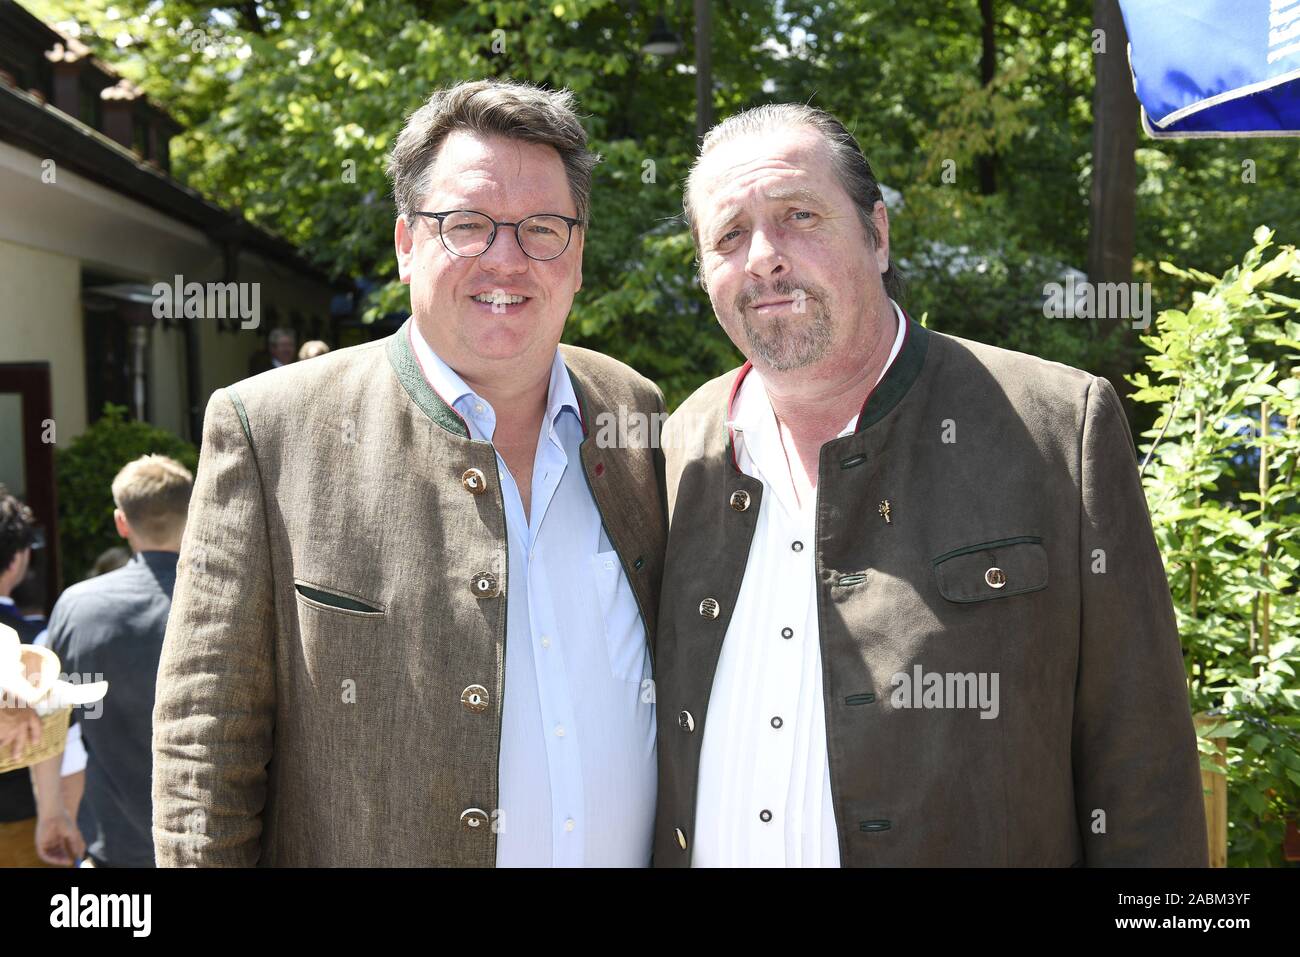 The cabaret artists Helmut Schleich (l.) and Andreas Giebel at the Bavaricum 2019 symposium in Munich's Augustinerkeller. [automated translation] Stock Photo